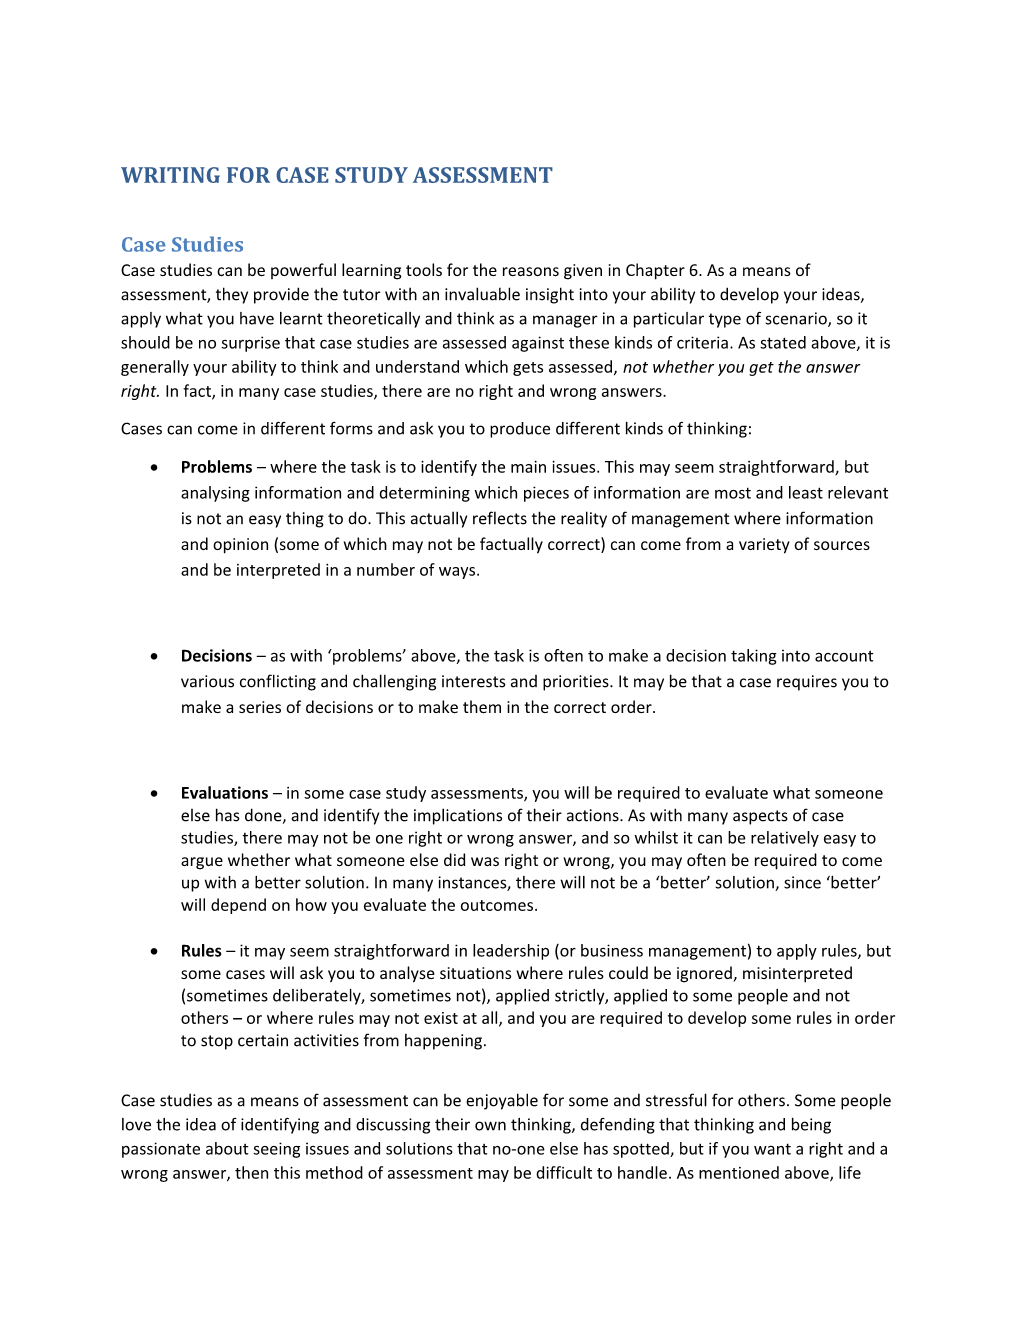 Writing for Case Study Assessment